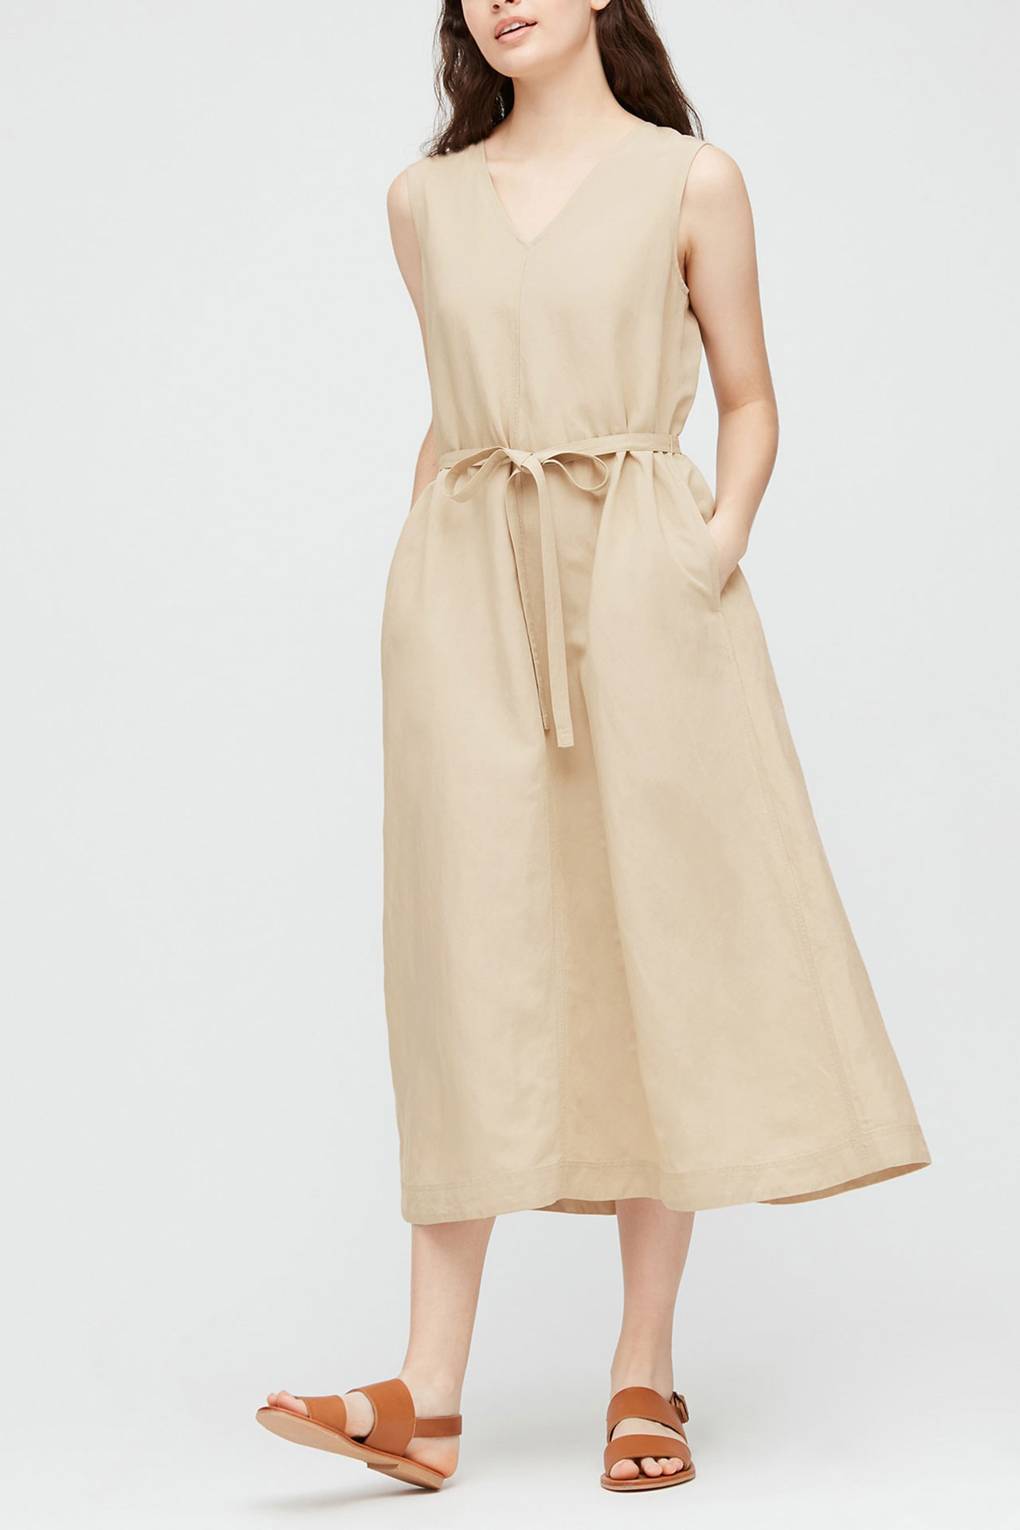 19 Best Linen Dresses To Keep You Cool This Summer | Glamour UK